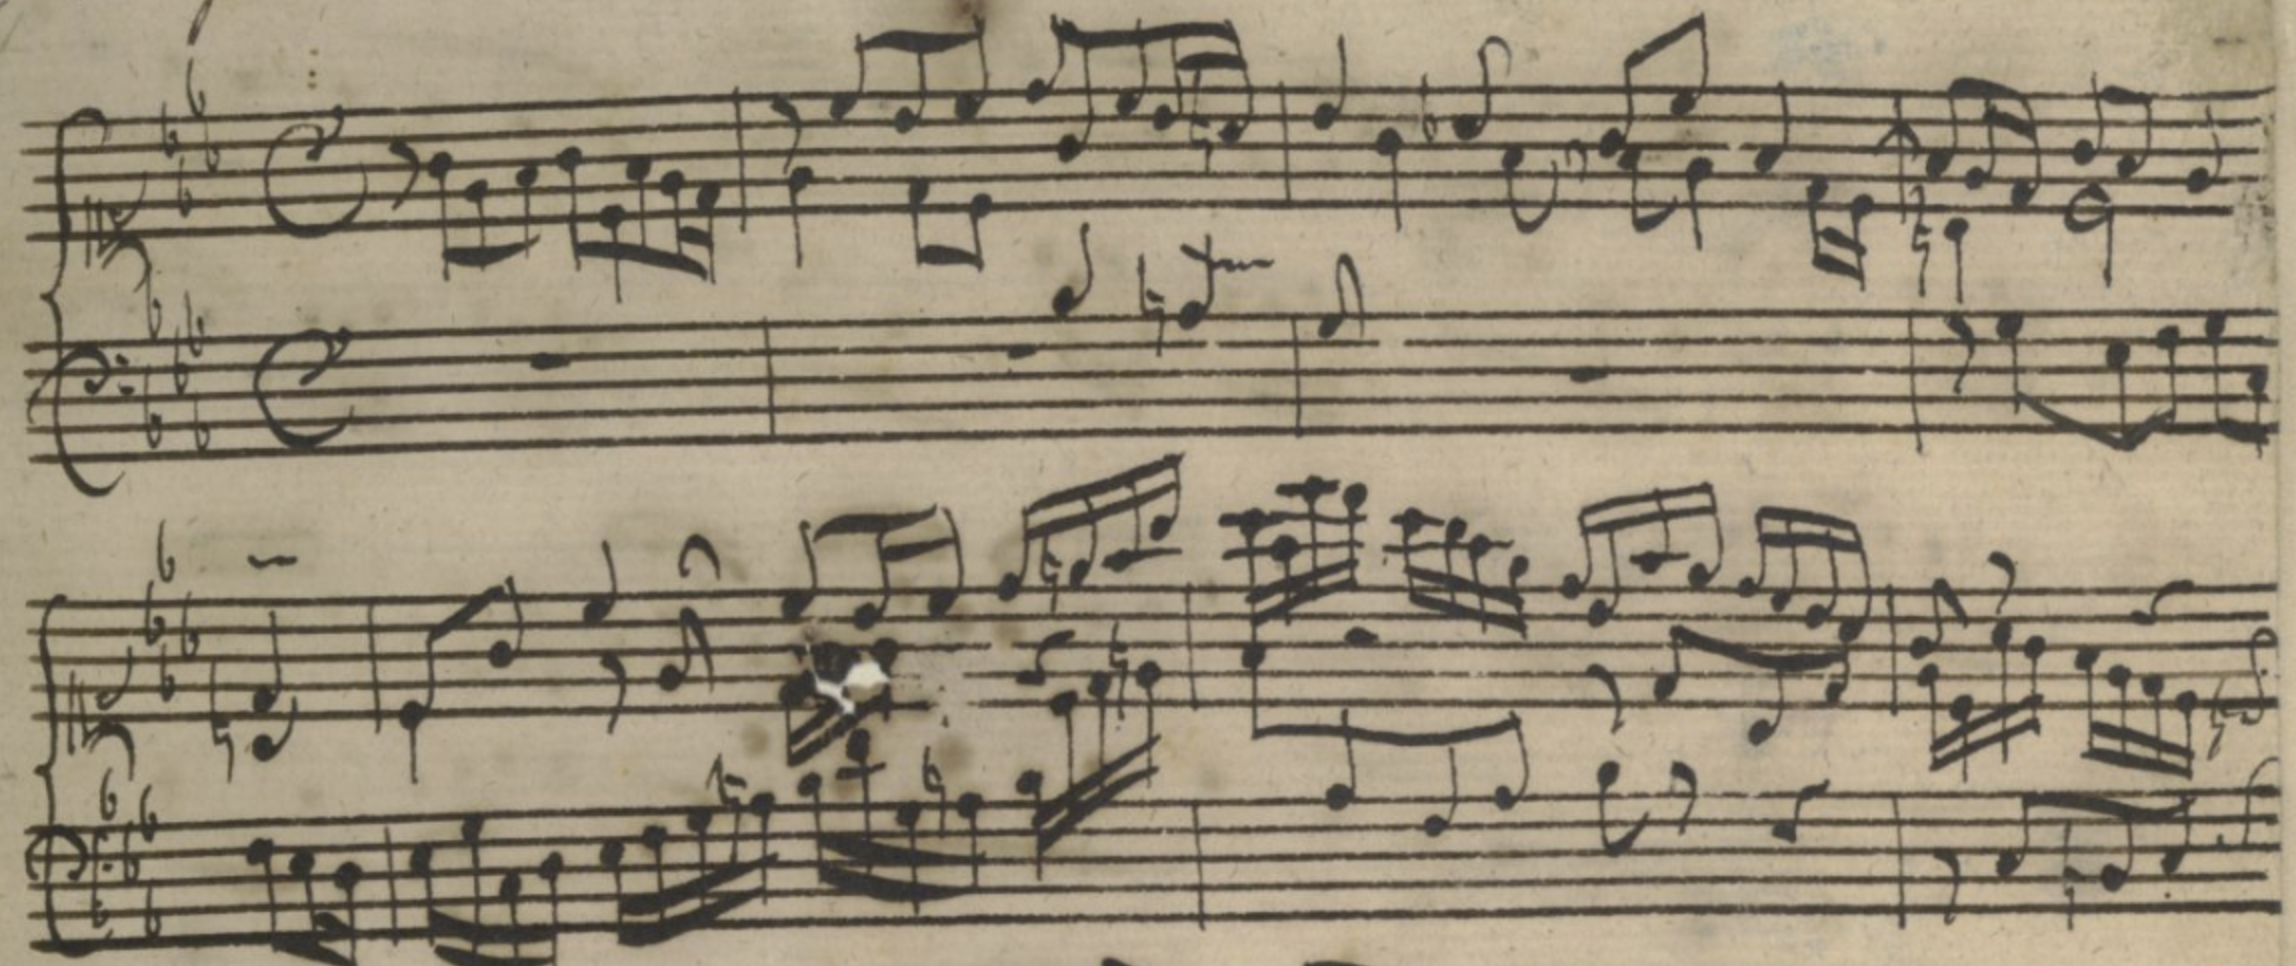 Manuscript of the c-minor fugue from the Well-tempered clavier